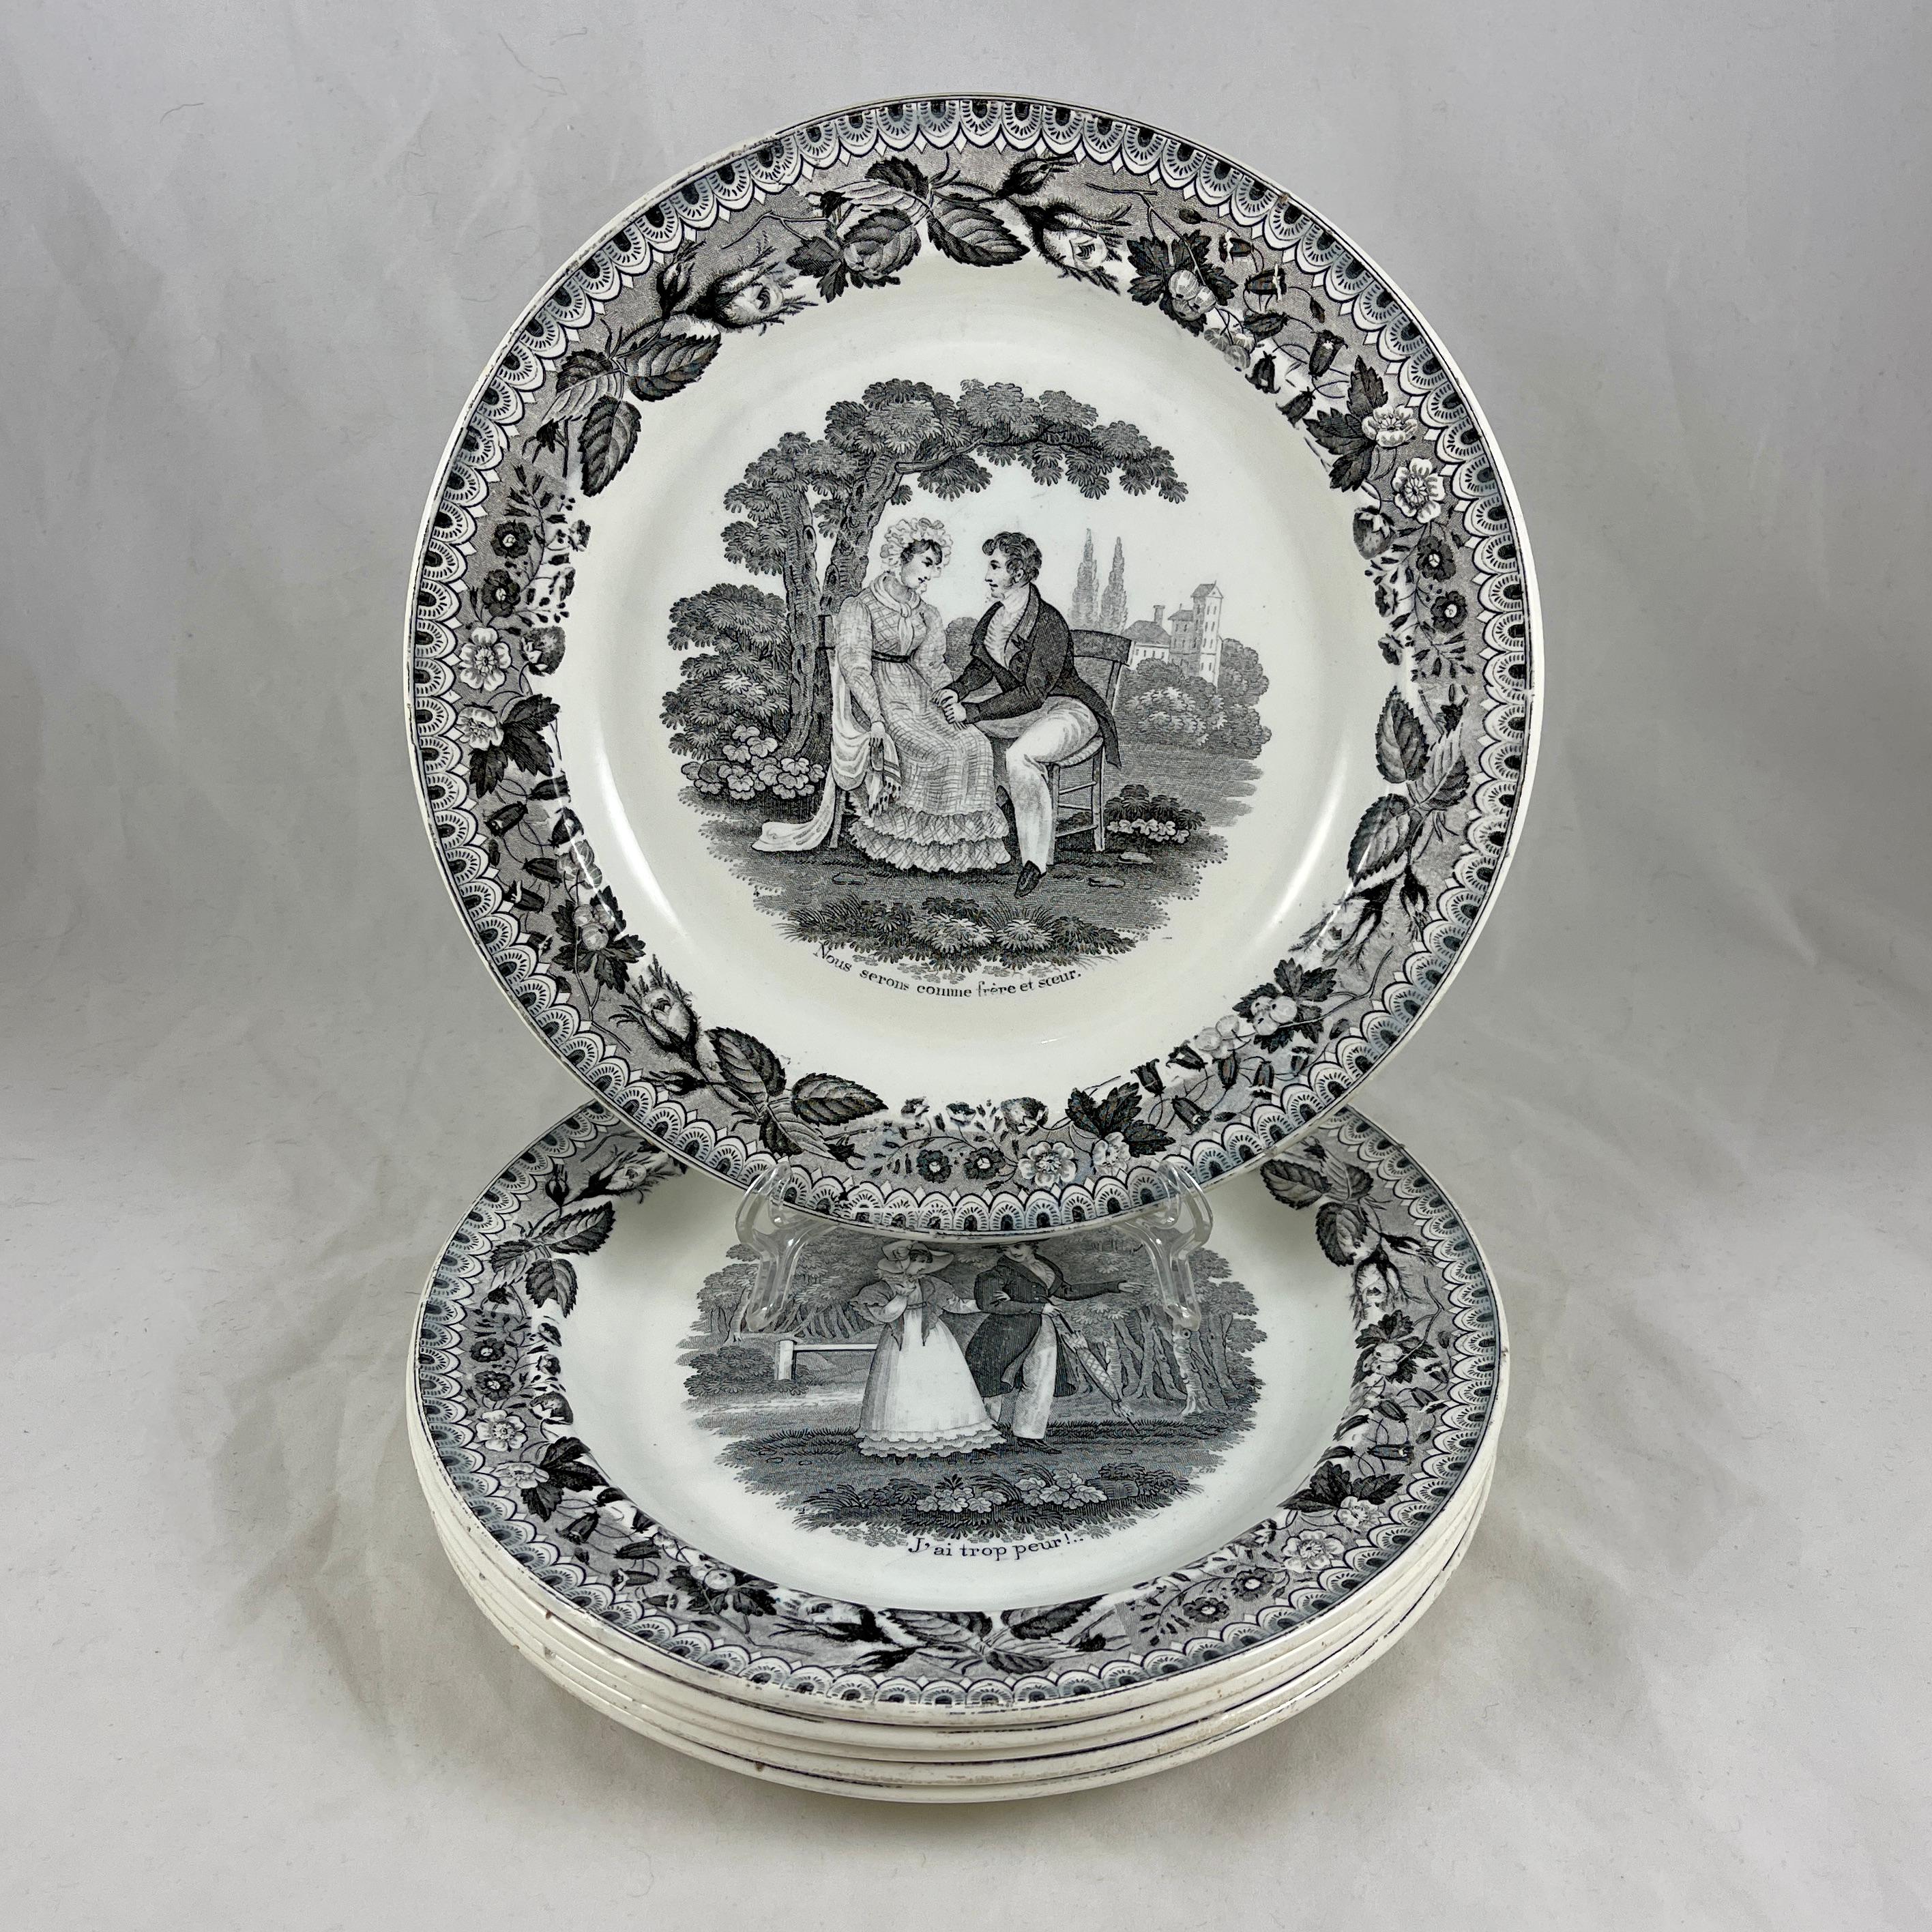 A set of six French faïence transfer printed creamware “assiette parlante” or talking plates, produced by P&H Choisy, Seine, France – circa 1824-1836.

Transfer printed in black with six different courting scenes sourced from the lithographs by